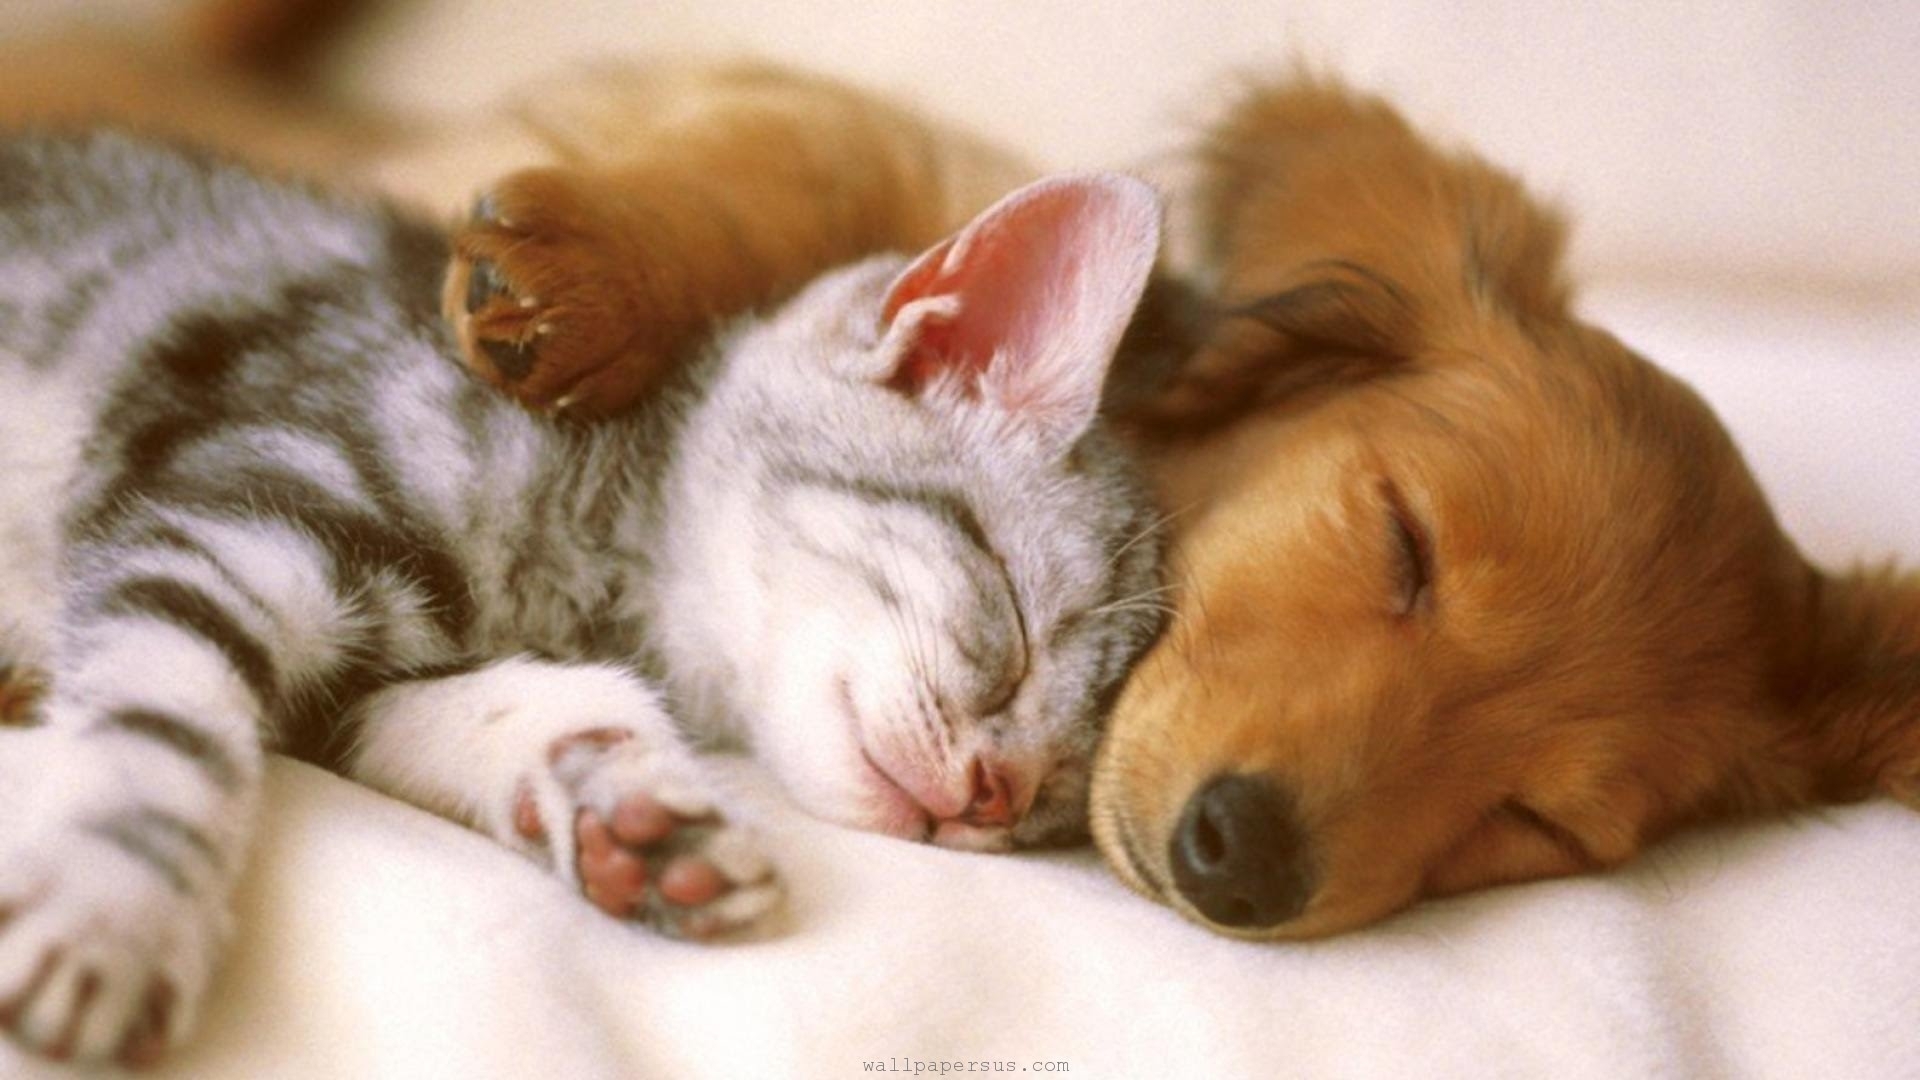 cutest kittens &amp; puppies falling asleep compilation - youtube